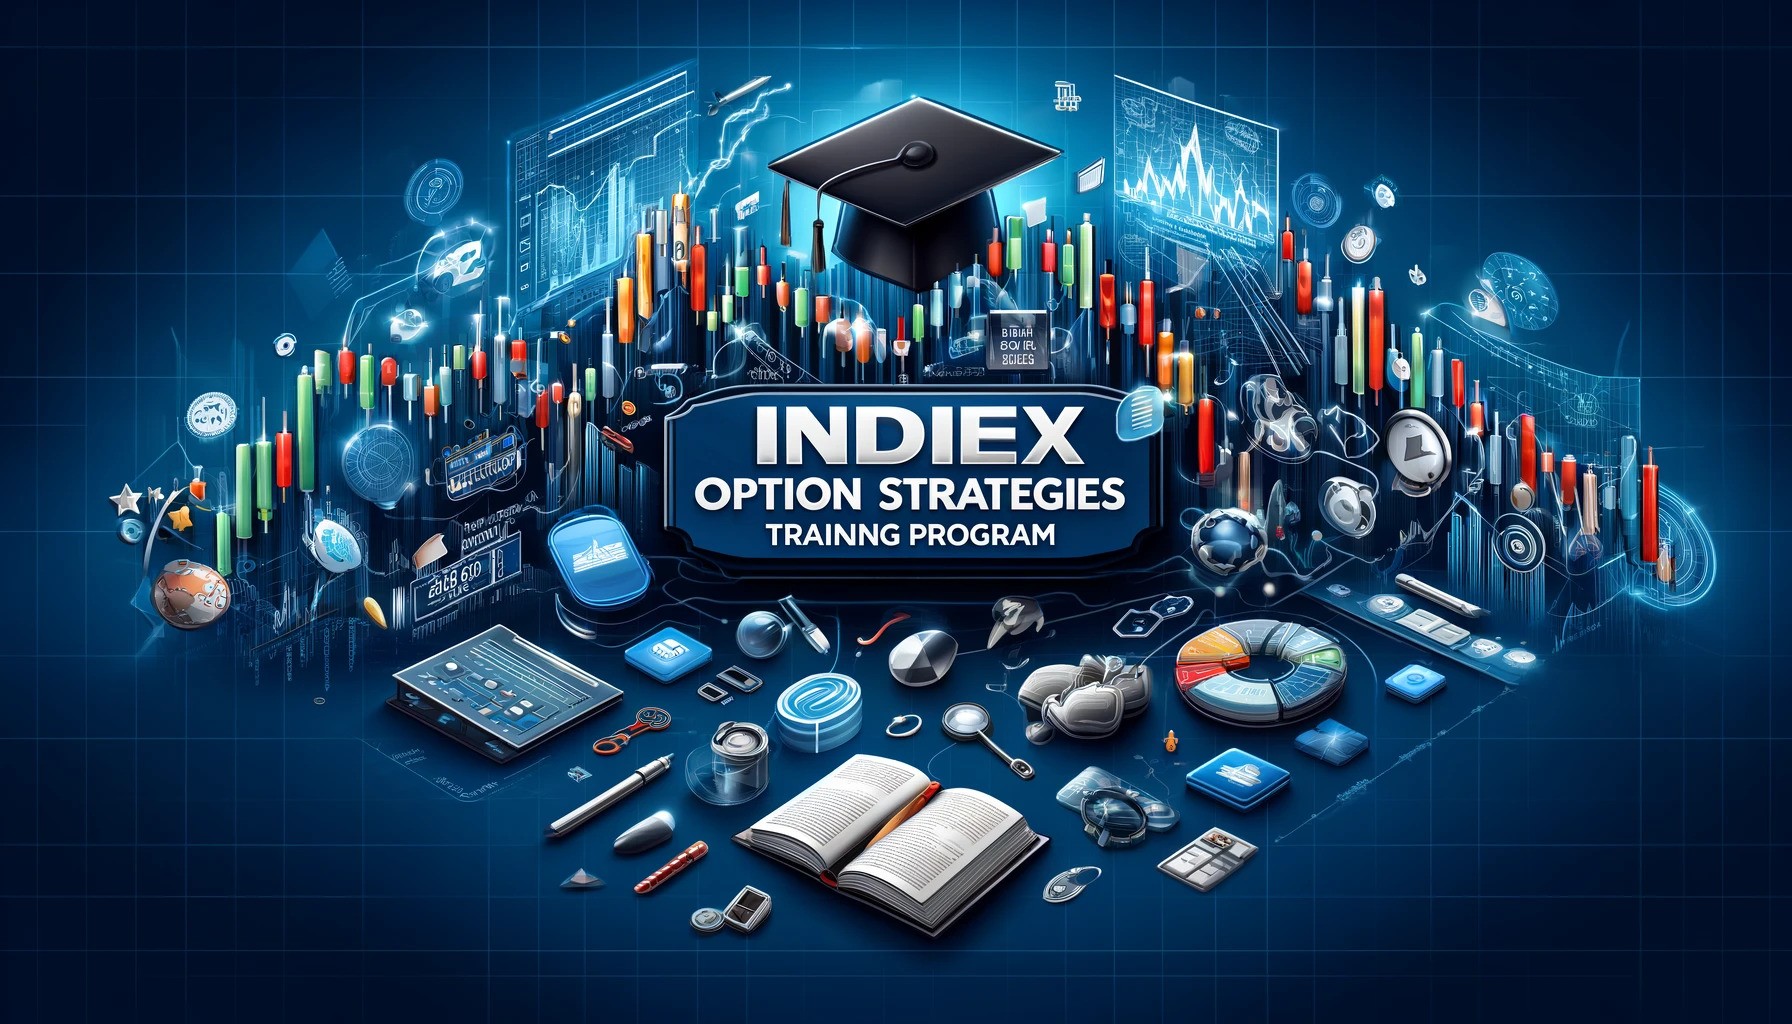 Index Option Trading Strategies for Banknifty, Nifty, Finnifty, Bankex, Sensex & Midcpnifty